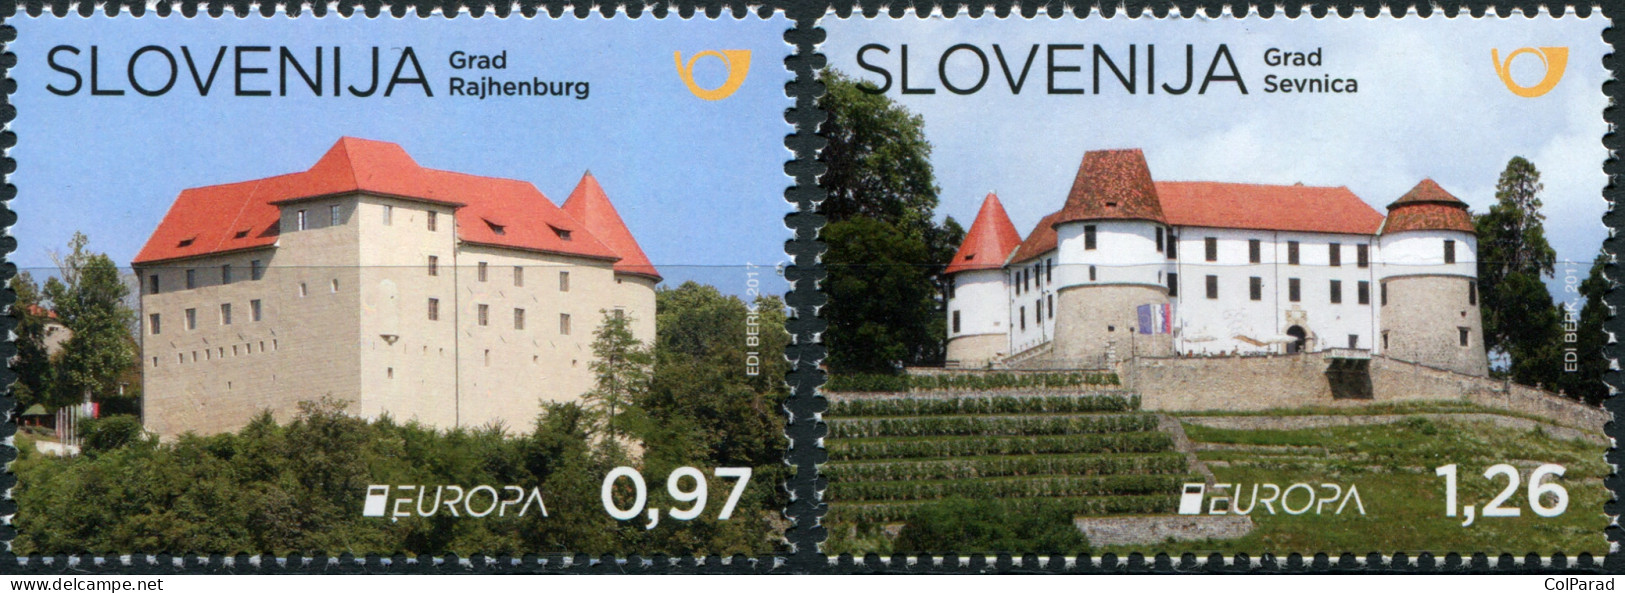 SLOVENIA - 2017 - SET OF 2 STAMPS MNH ** - EUROPA Stamps - Palaces And Castles - Slovénie